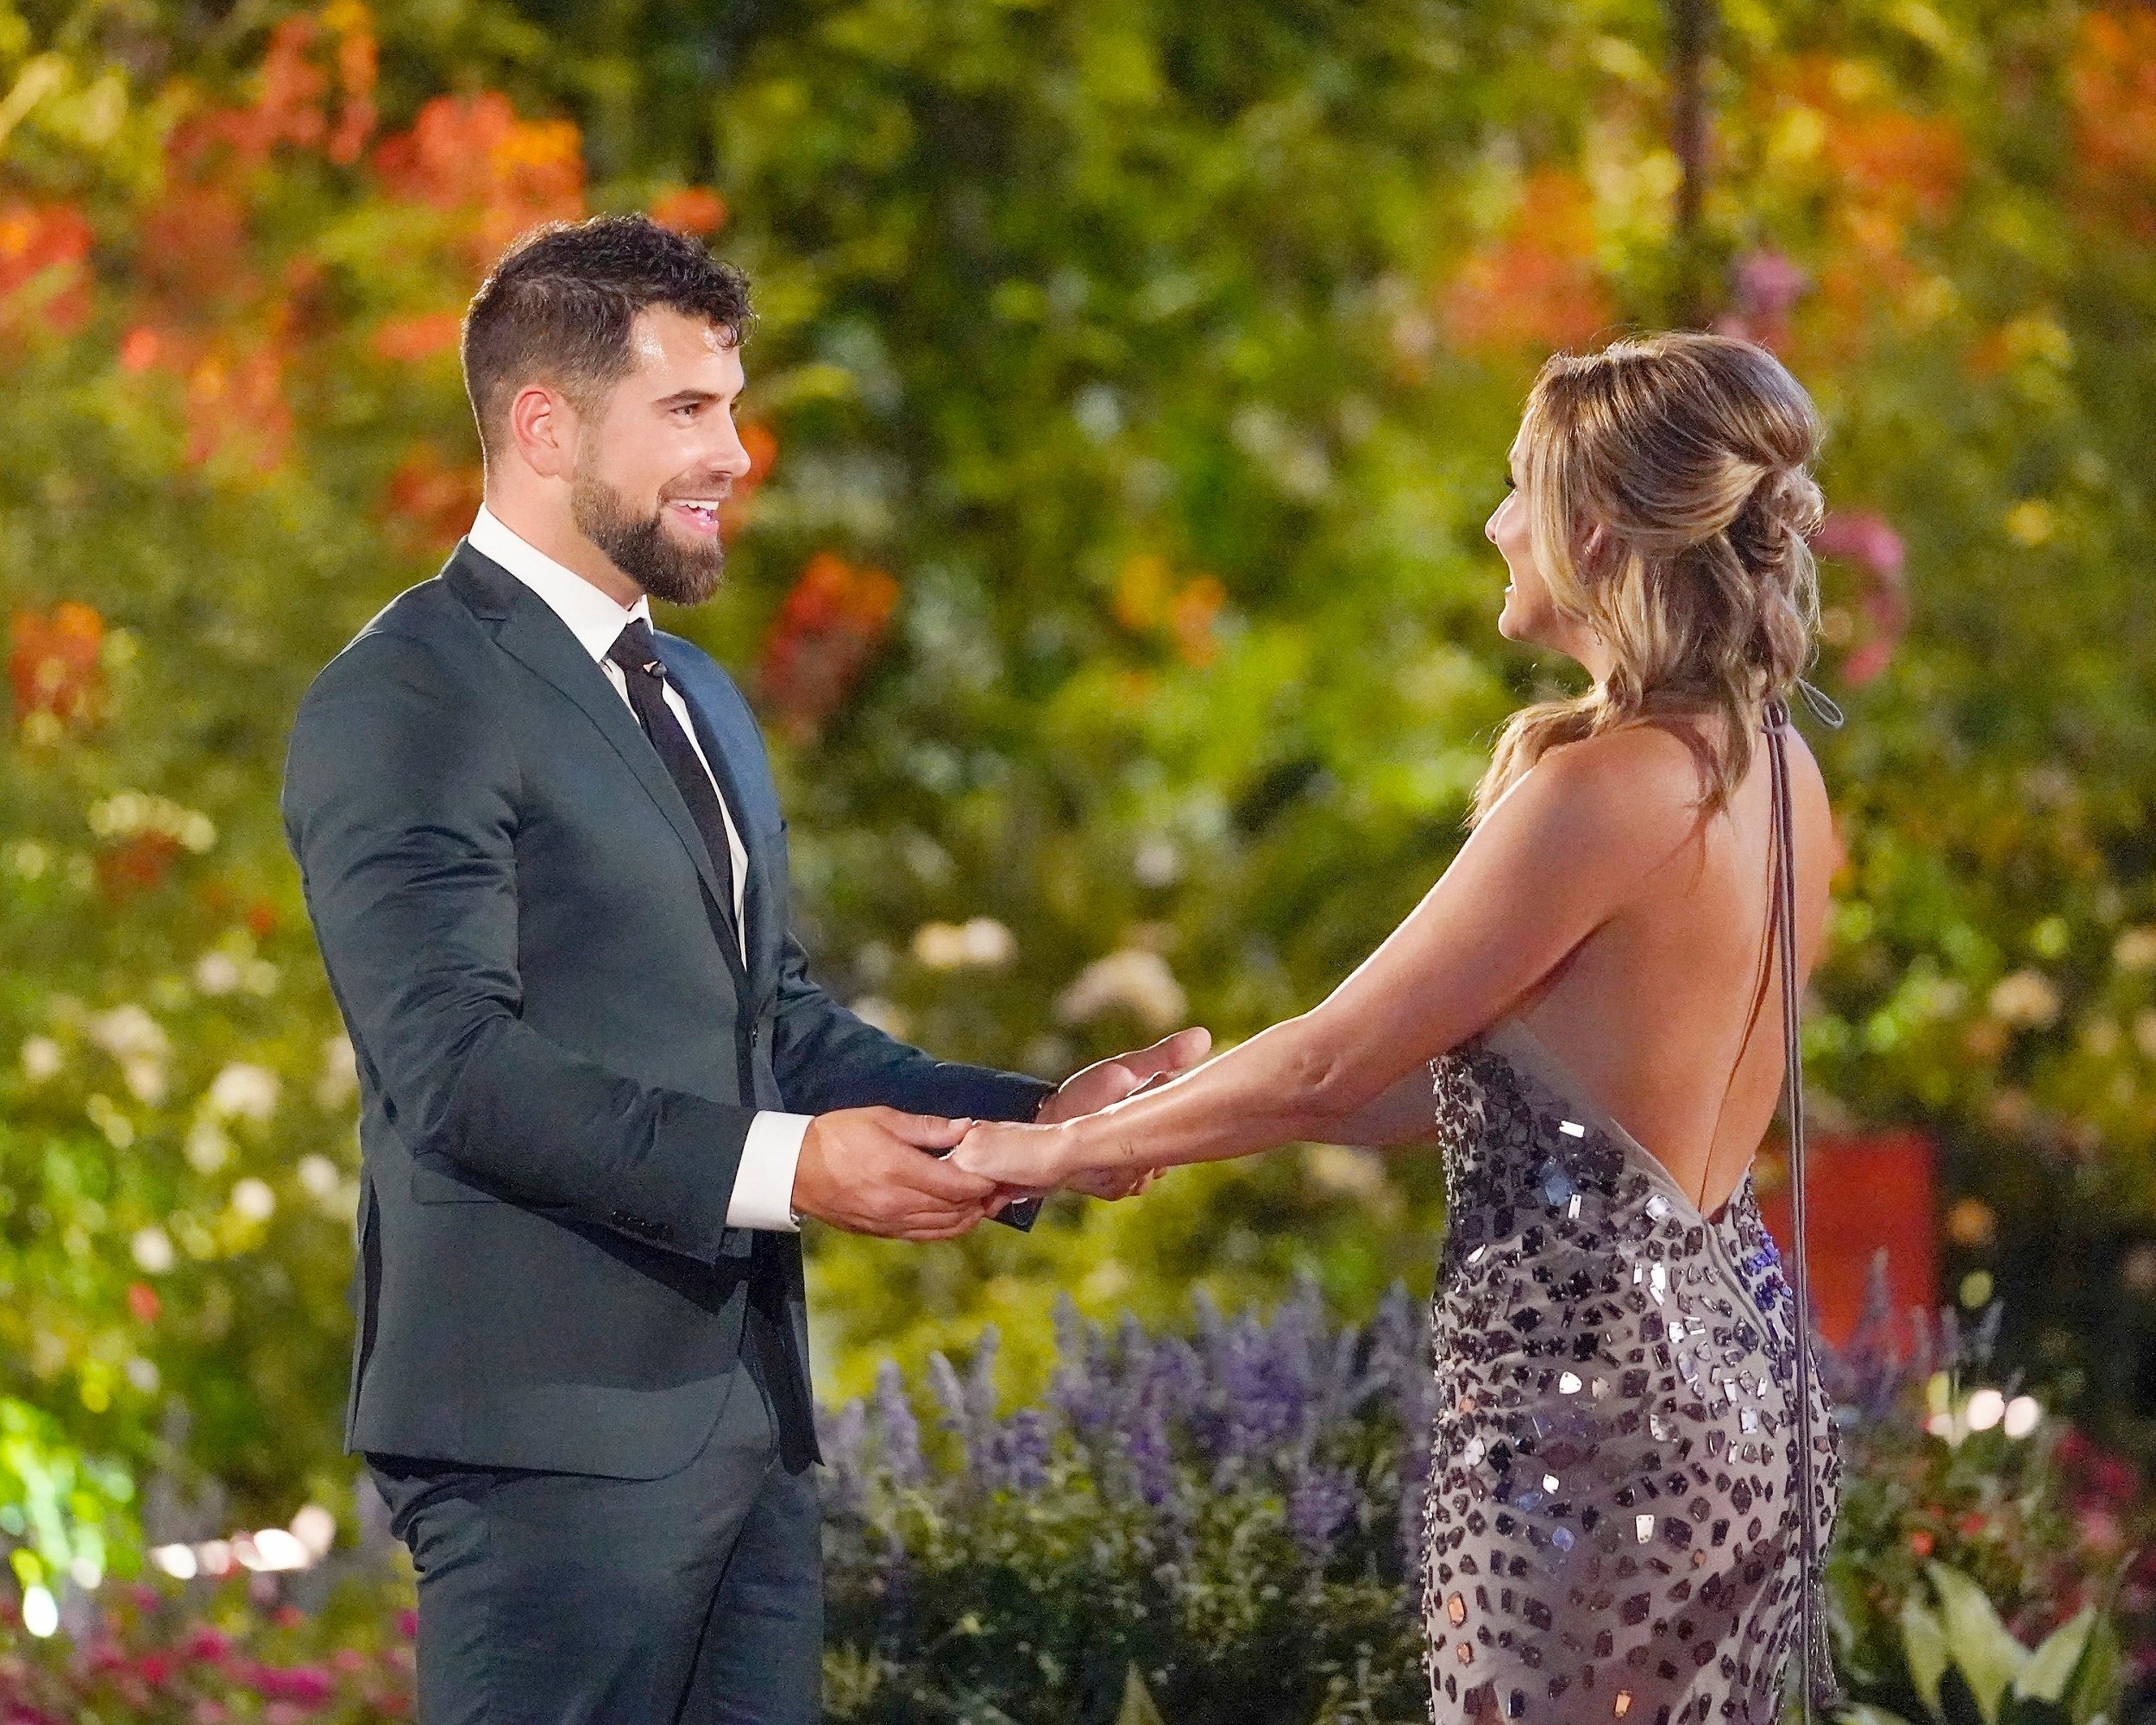 'The Bachelorette' lead Clare Crawley with contestant Blake Moynes